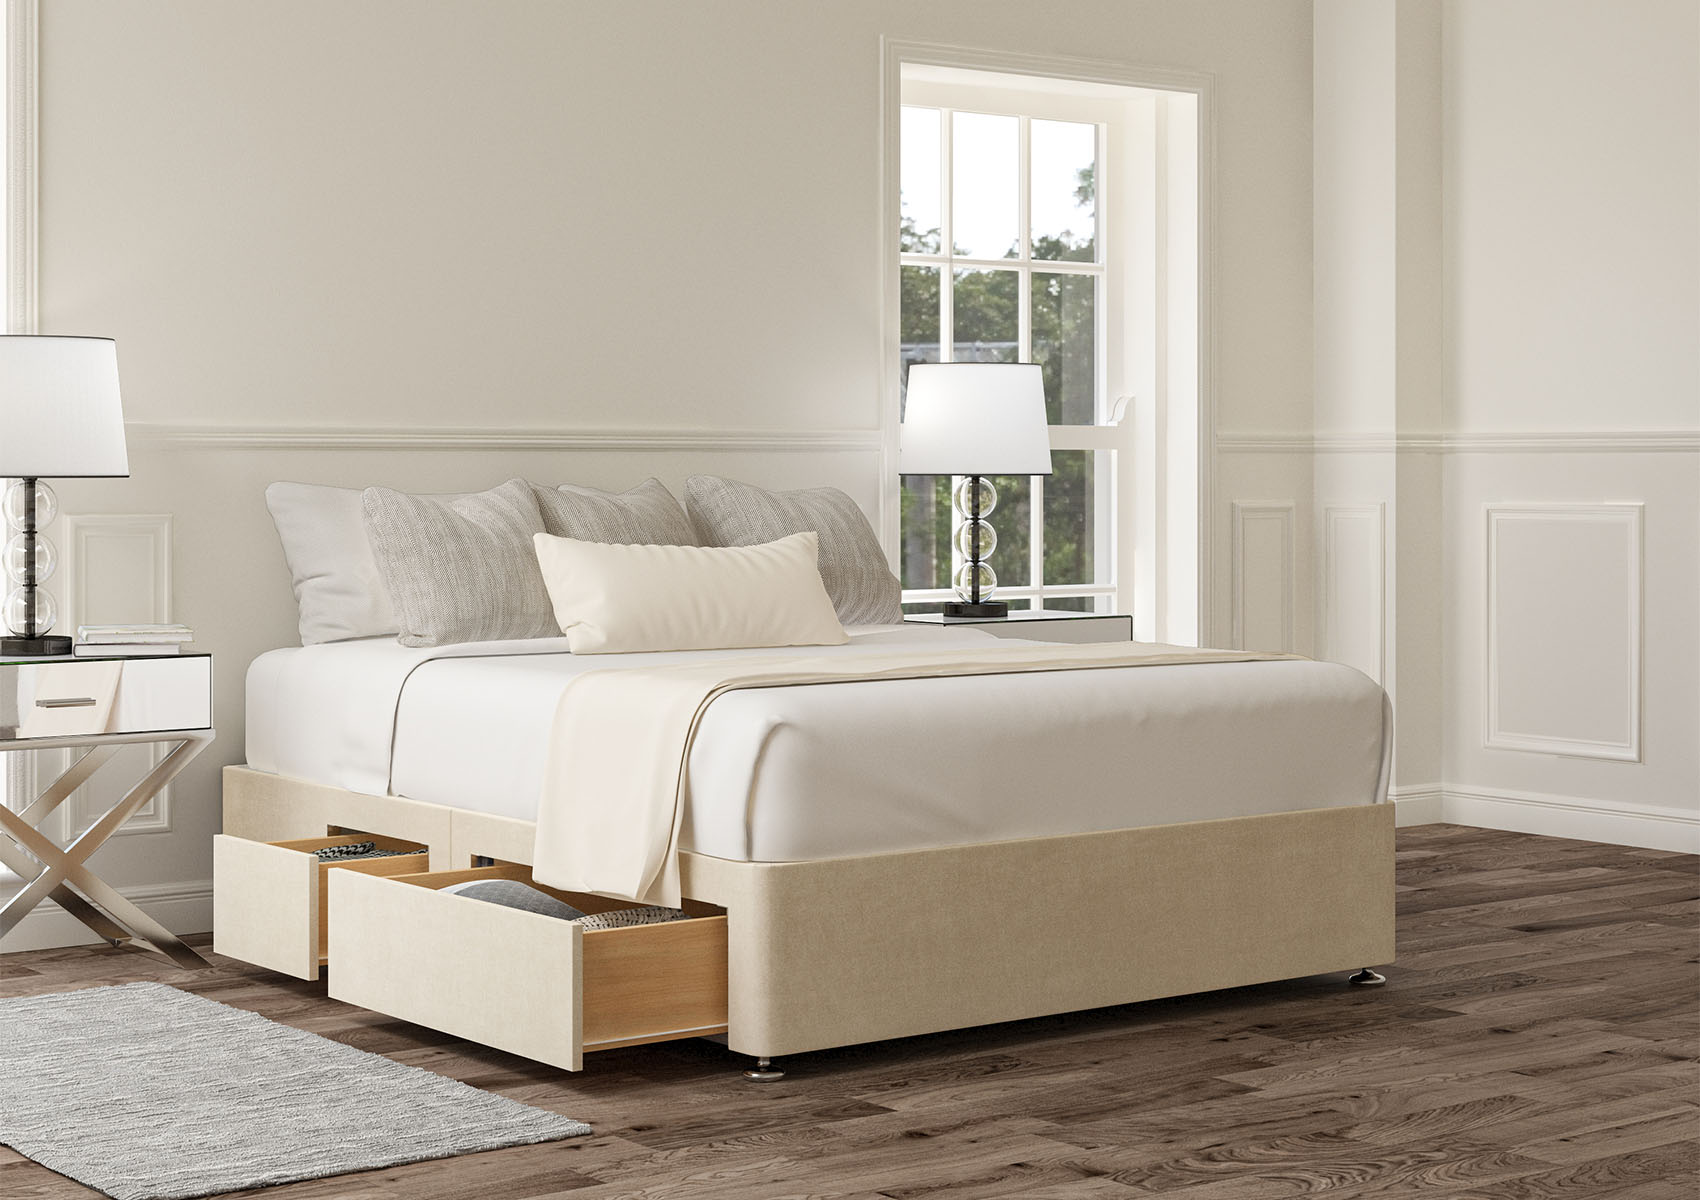 View 22 Naples Cream Upholstered Compact Double Storage Bed Time4Sleep information